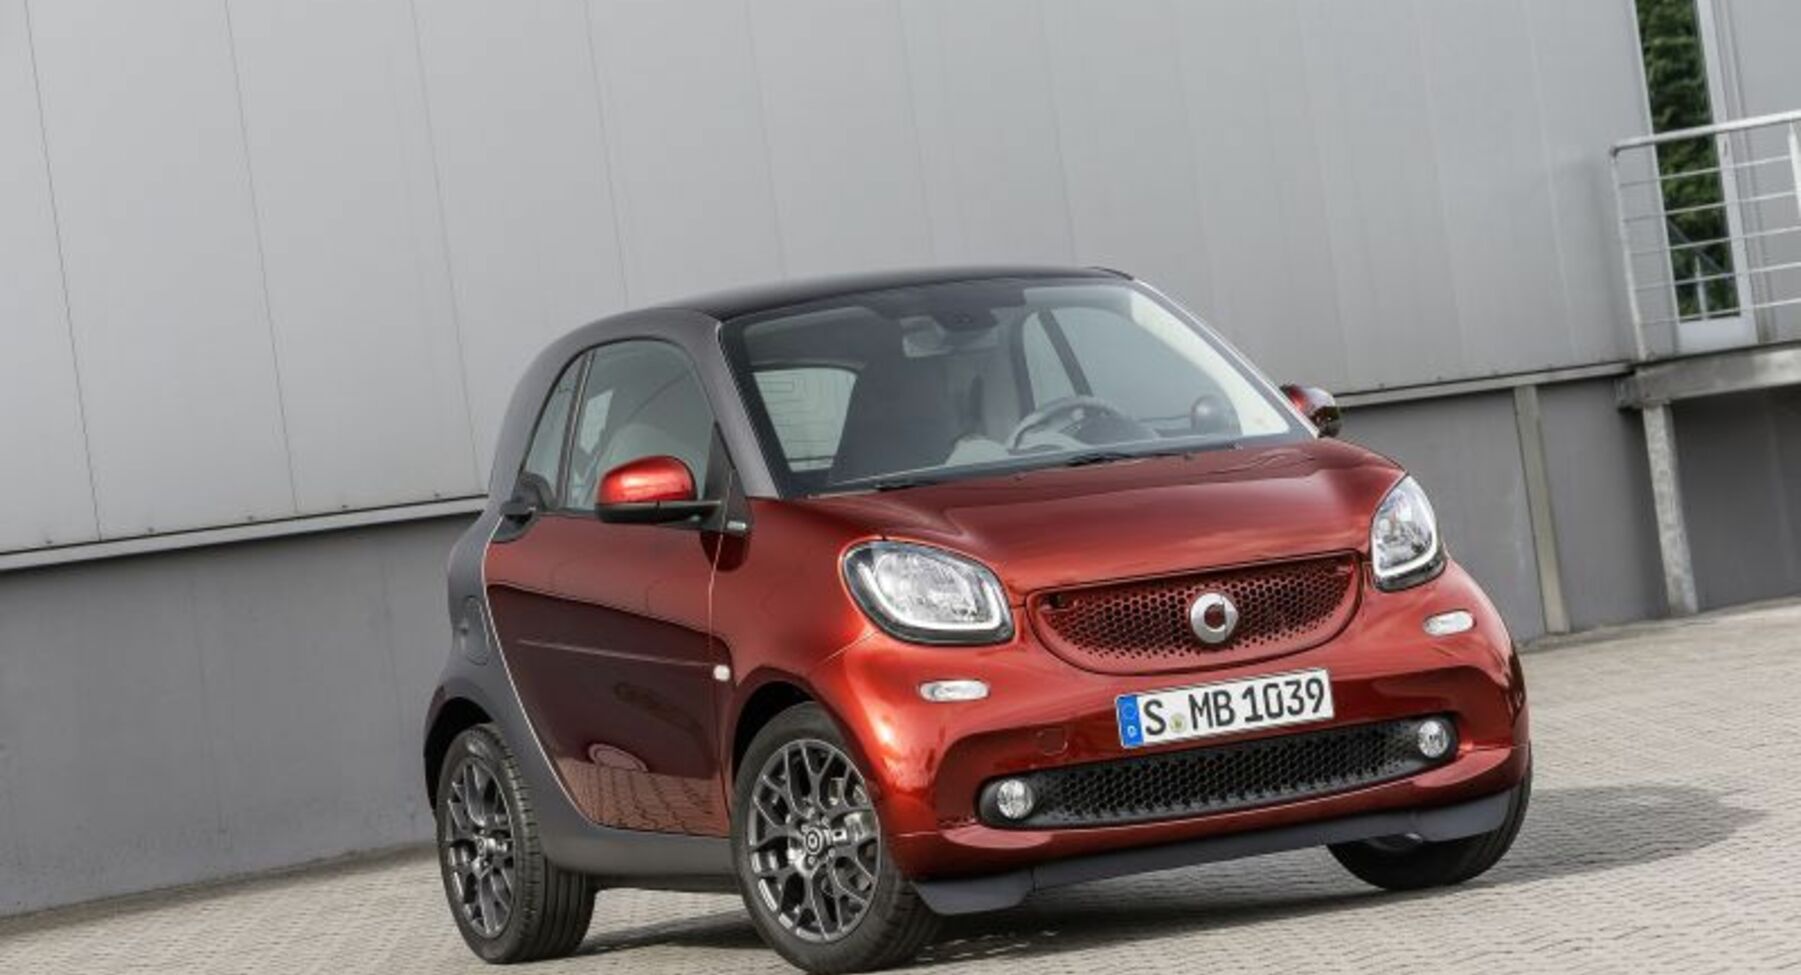 Smart Fortwo III coupe (C453) 1.0 (71 Hp) Automatic 2014, 2015, 2016, 2017, 2018, 2019 